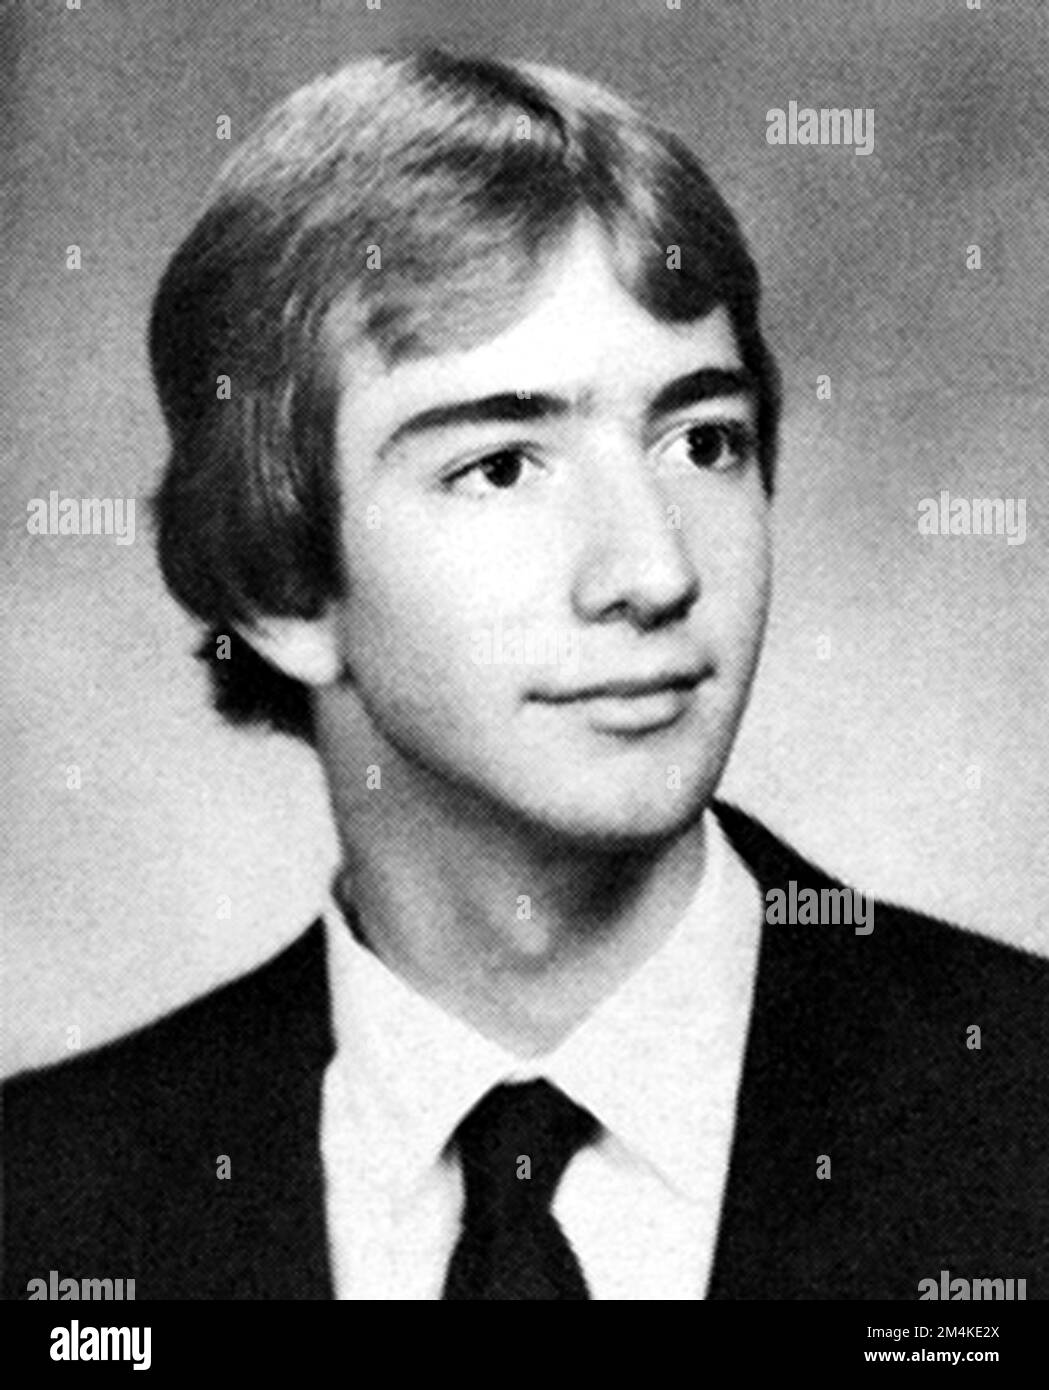 1981 ca, USA : The celebrated american rich JEFF BEZOS ( Preston Jorgensen - born 12 january 1964 ) when was a young teenager aged 17 , from HIGHT SCHOOL YEARBOOK . American entrepreneur, media proprietor , investor , computer engineer , and commercial astronaut . He is the founder,  executive chairman and former president and CEO of AMAZON .  Unknown photographer .-  RITRATTO - PORTRAIT - INFORMATICA - INFORMATICO - INFORMATICS - COMPUTER TECHNOLOGY  - HISTORY - FOTO STORICHE - TYCOON - personalità  da giovani da giovane - personality personalities when was young - INFANZIA - CHILDHOOD - RAGA Stock Photo